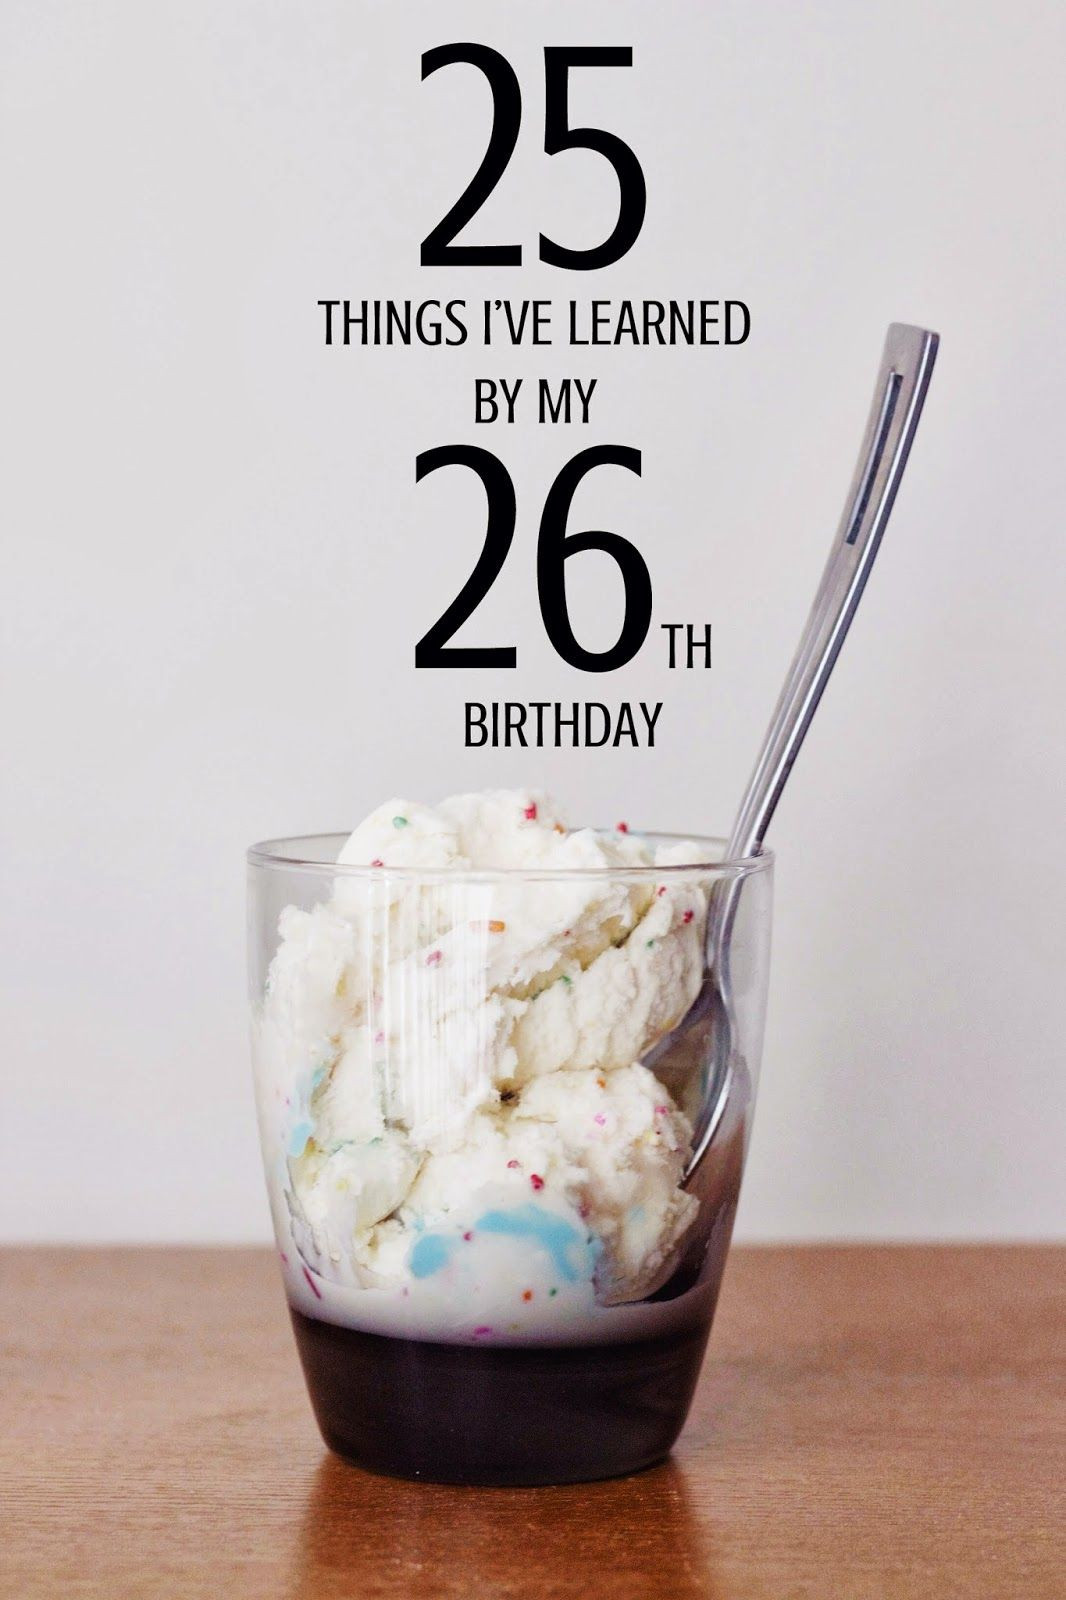 26th Birthday Party Ideas
 Anchored Souls 25 THINGS I VE LEARNED BY MY 26TH BIRTHDAY